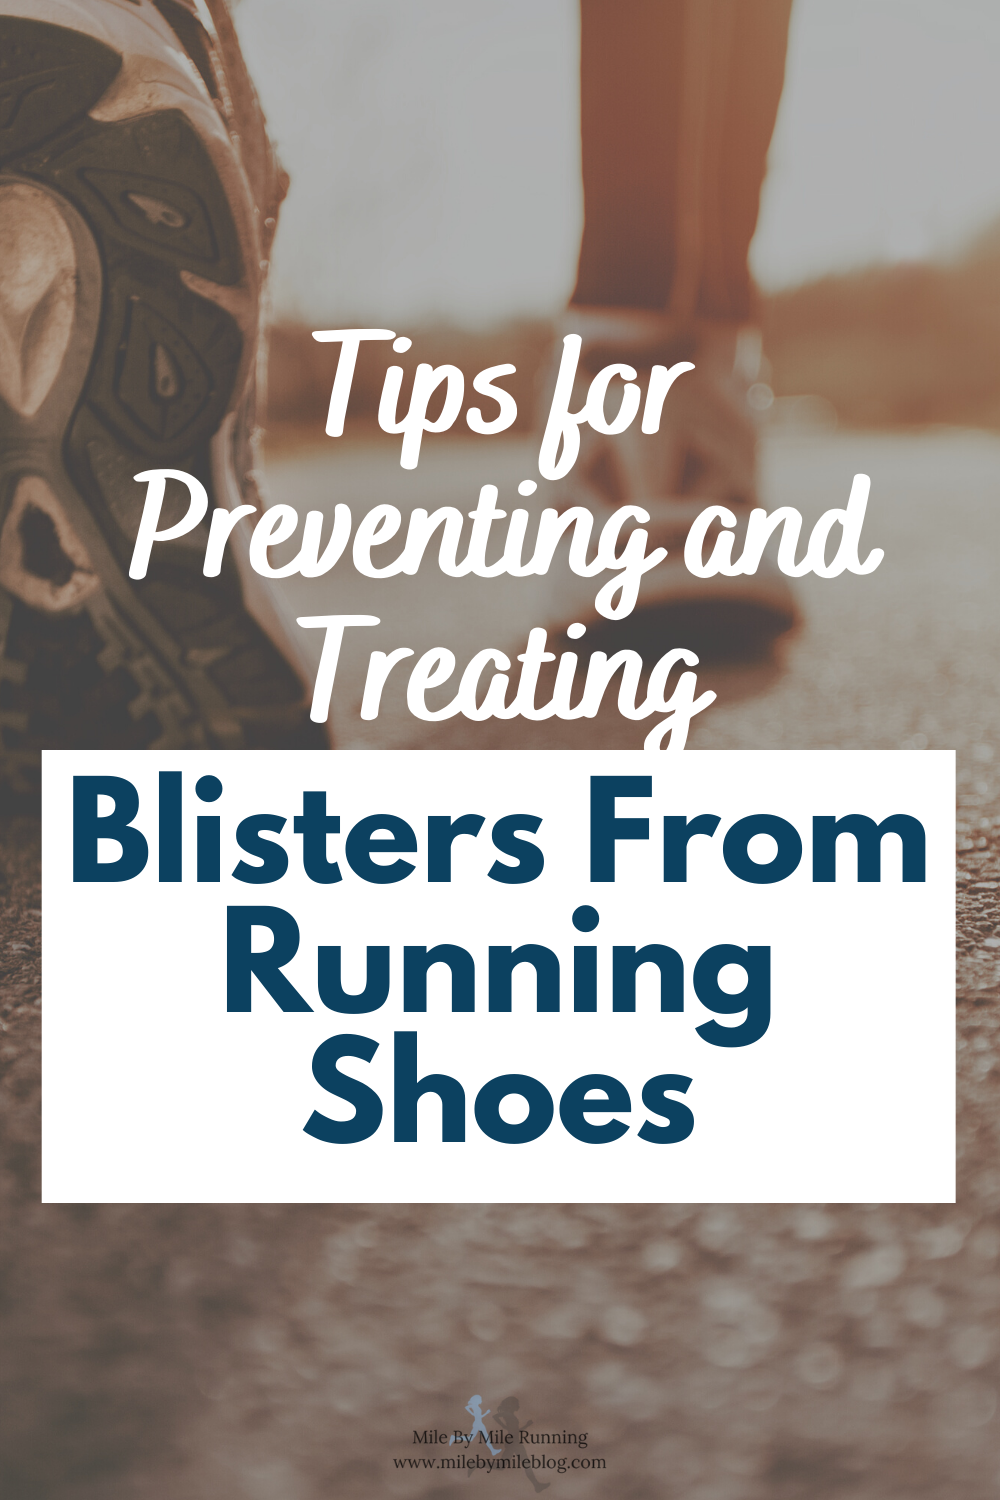 Have you ever had blisters get in the way of your running? Don't be sidelined by this preventable injury. Here are some tips to prevent and treat blisters from running shoes.